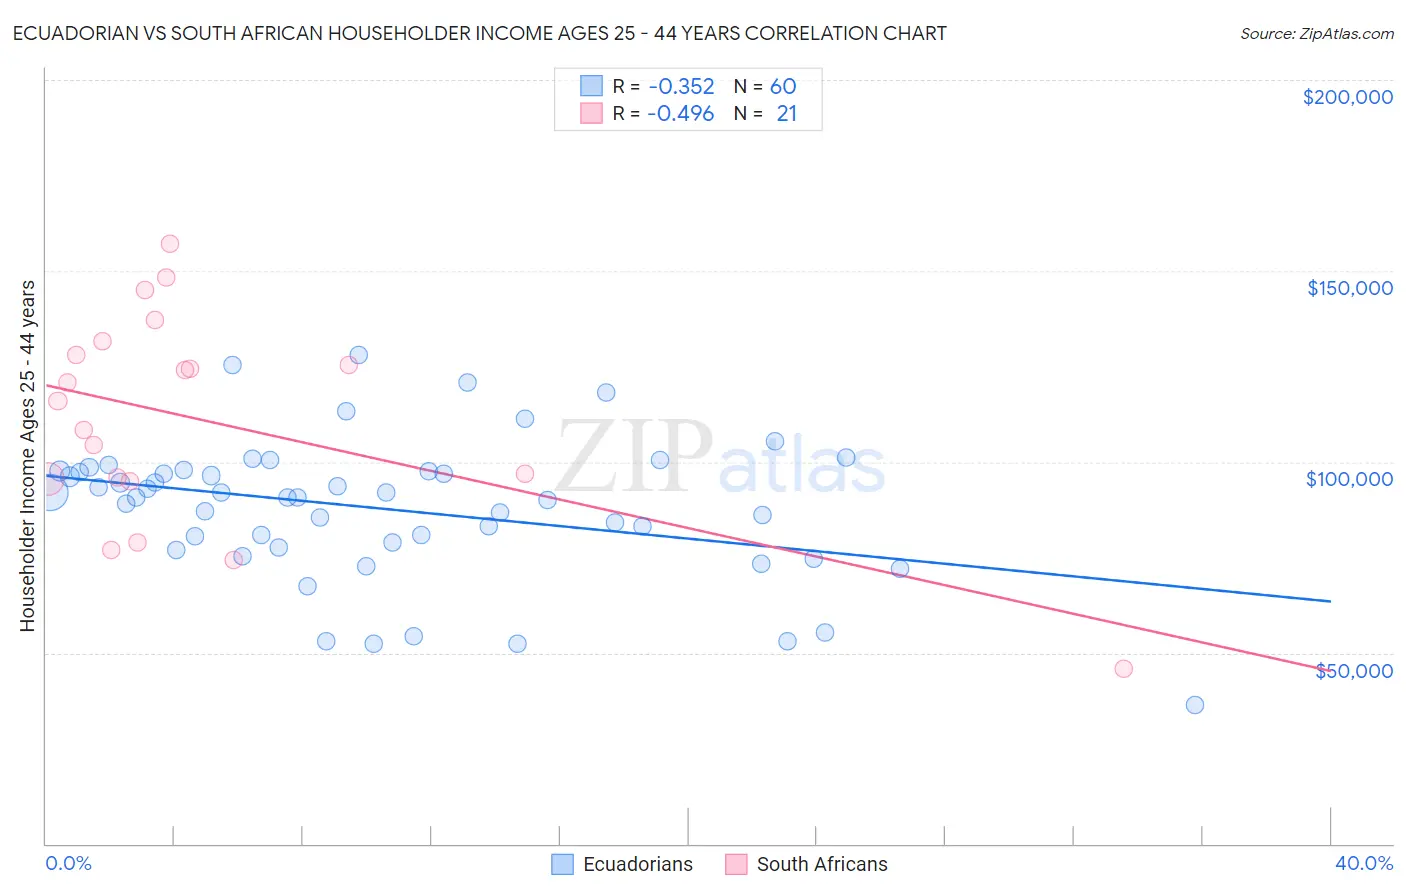 Ecuadorian vs South African Householder Income Ages 25 - 44 years